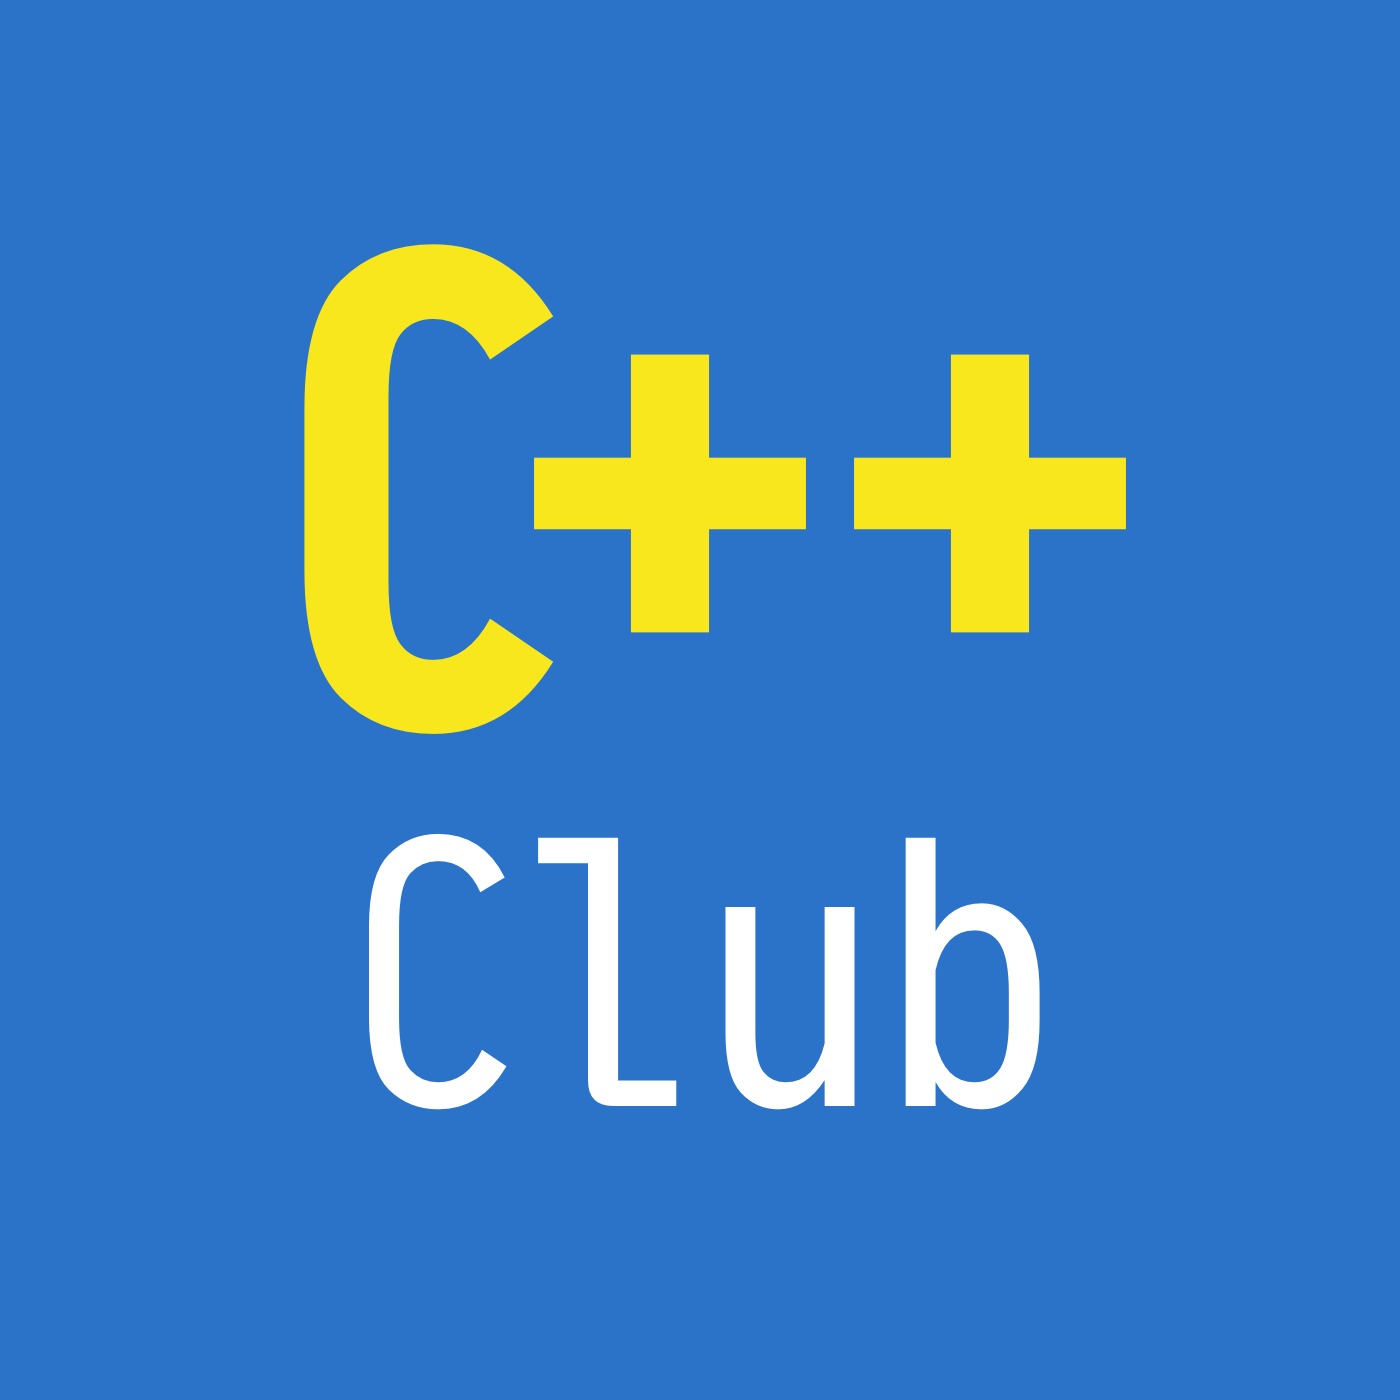 Embedded C++, Cpp2, September mailing